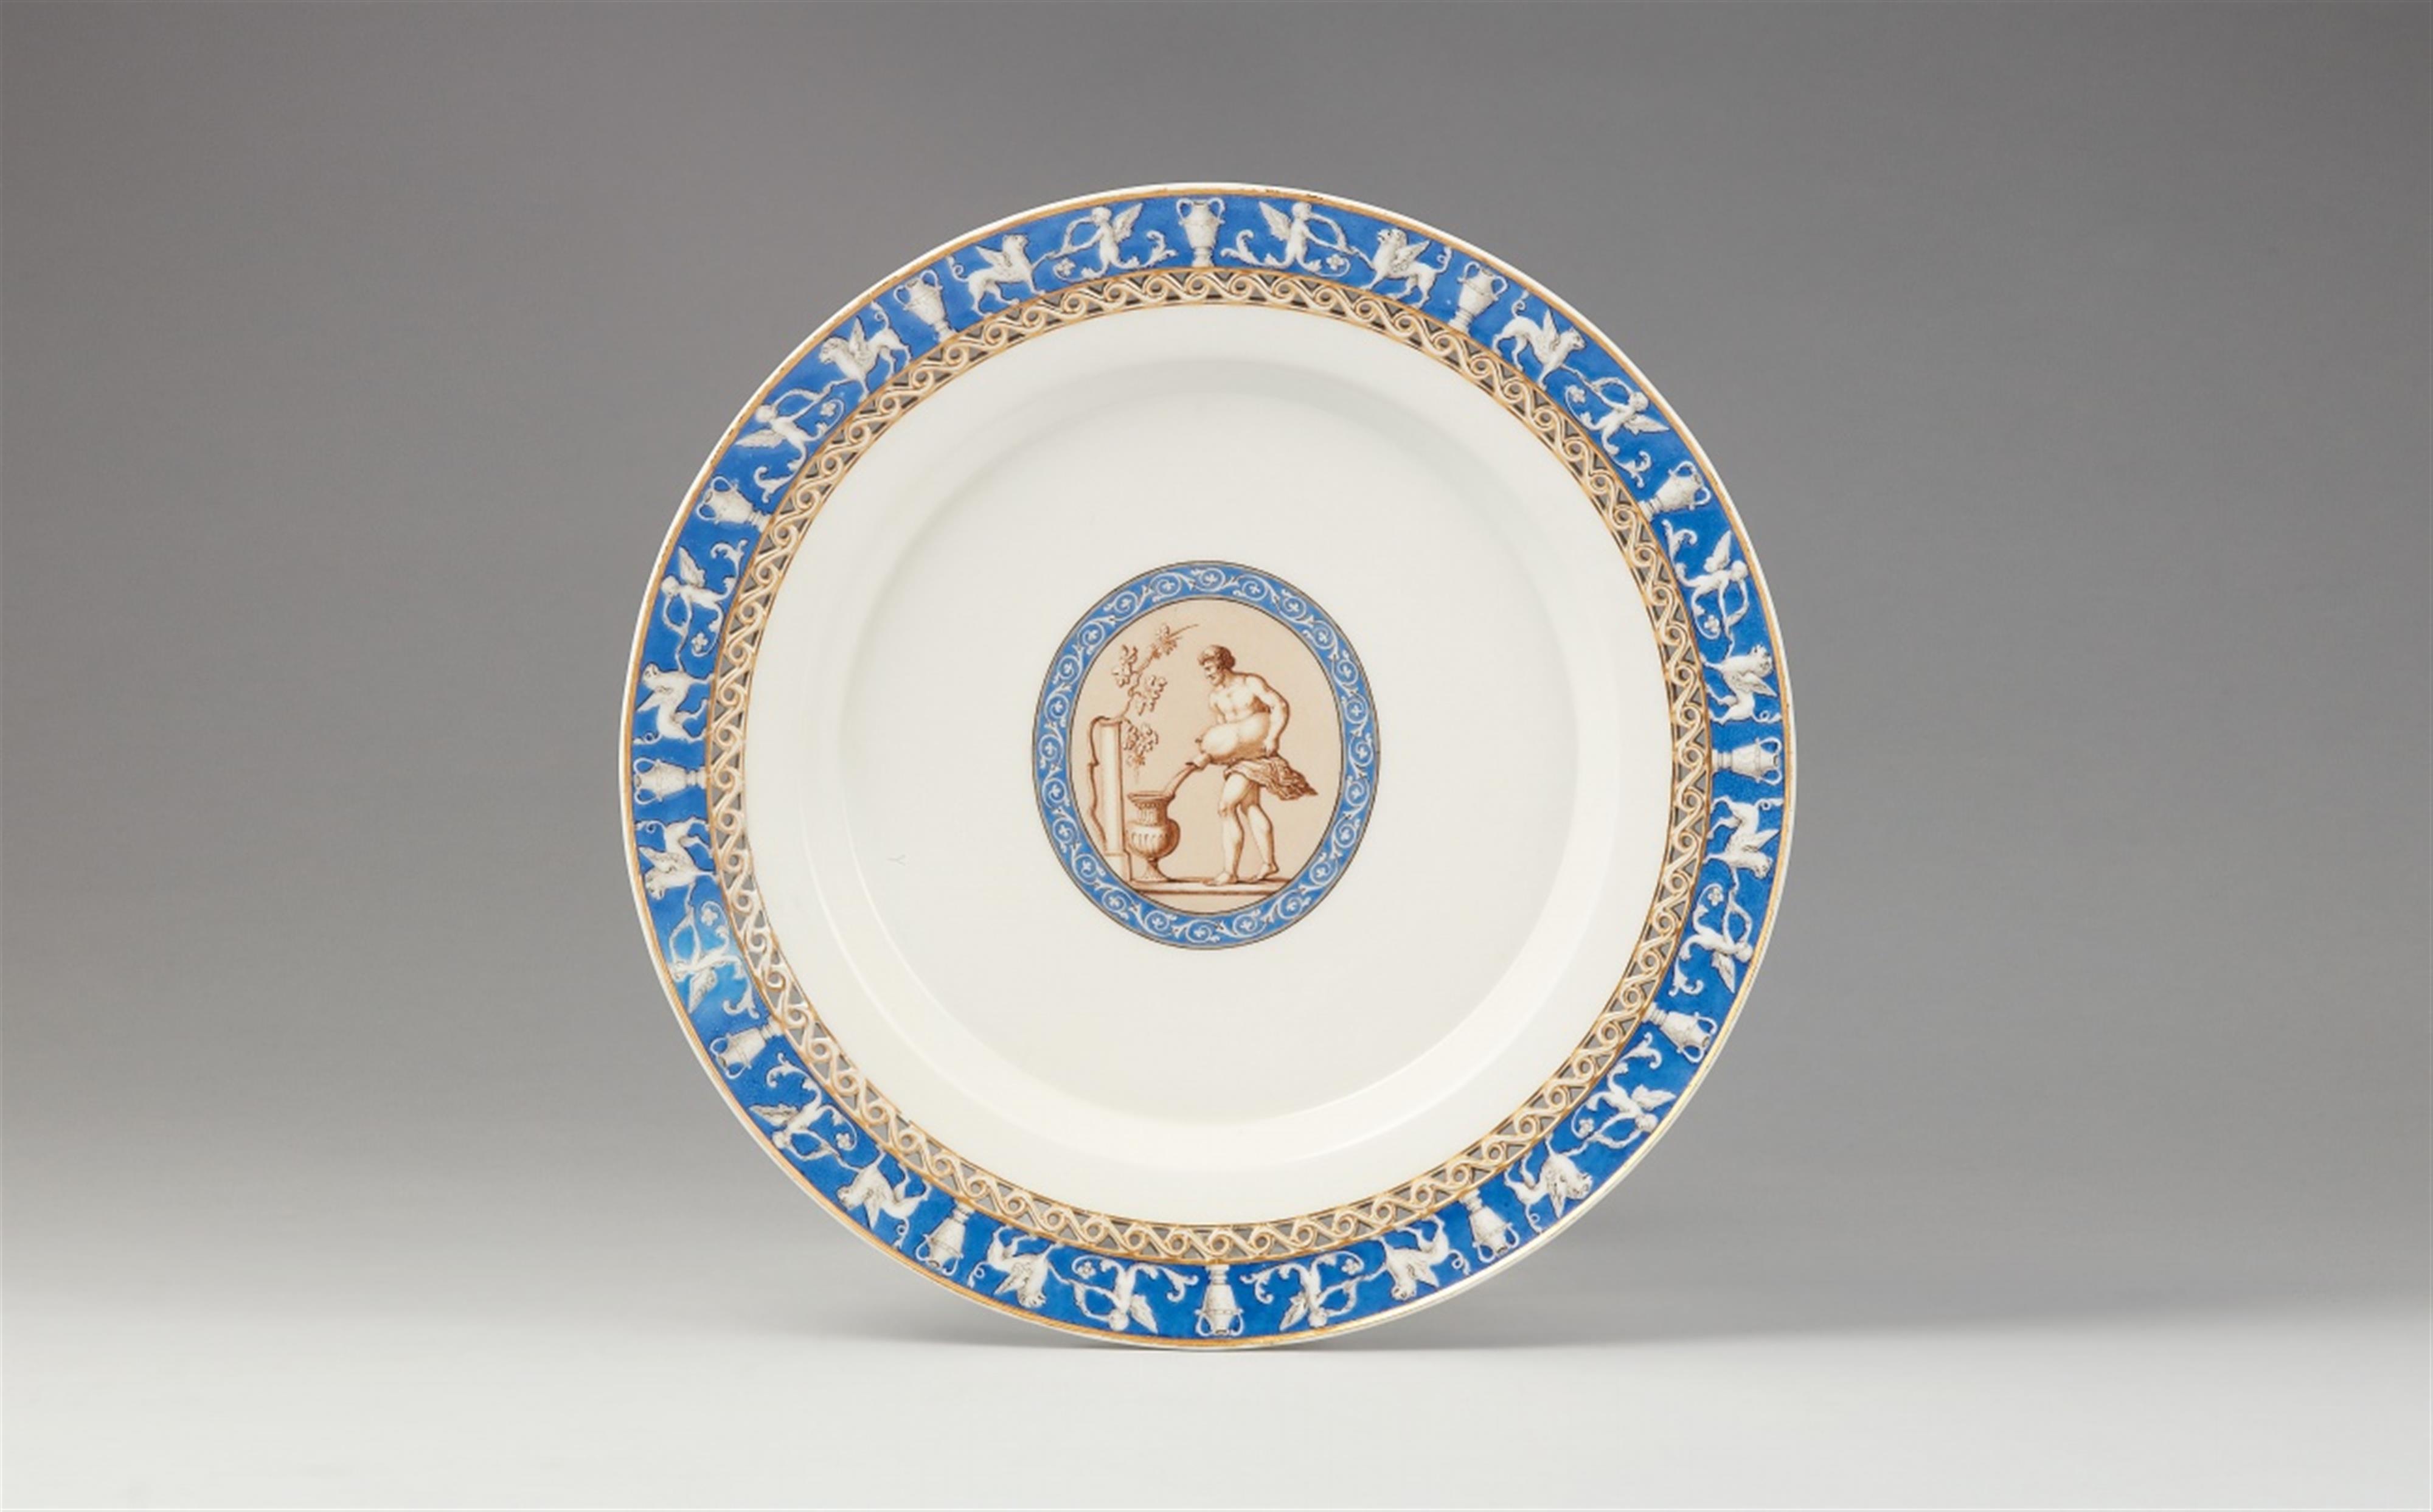 A rare Berlin KPM porcelain dessert plate from the dinner service for the Prince Bishop of Osnabruck - image-1